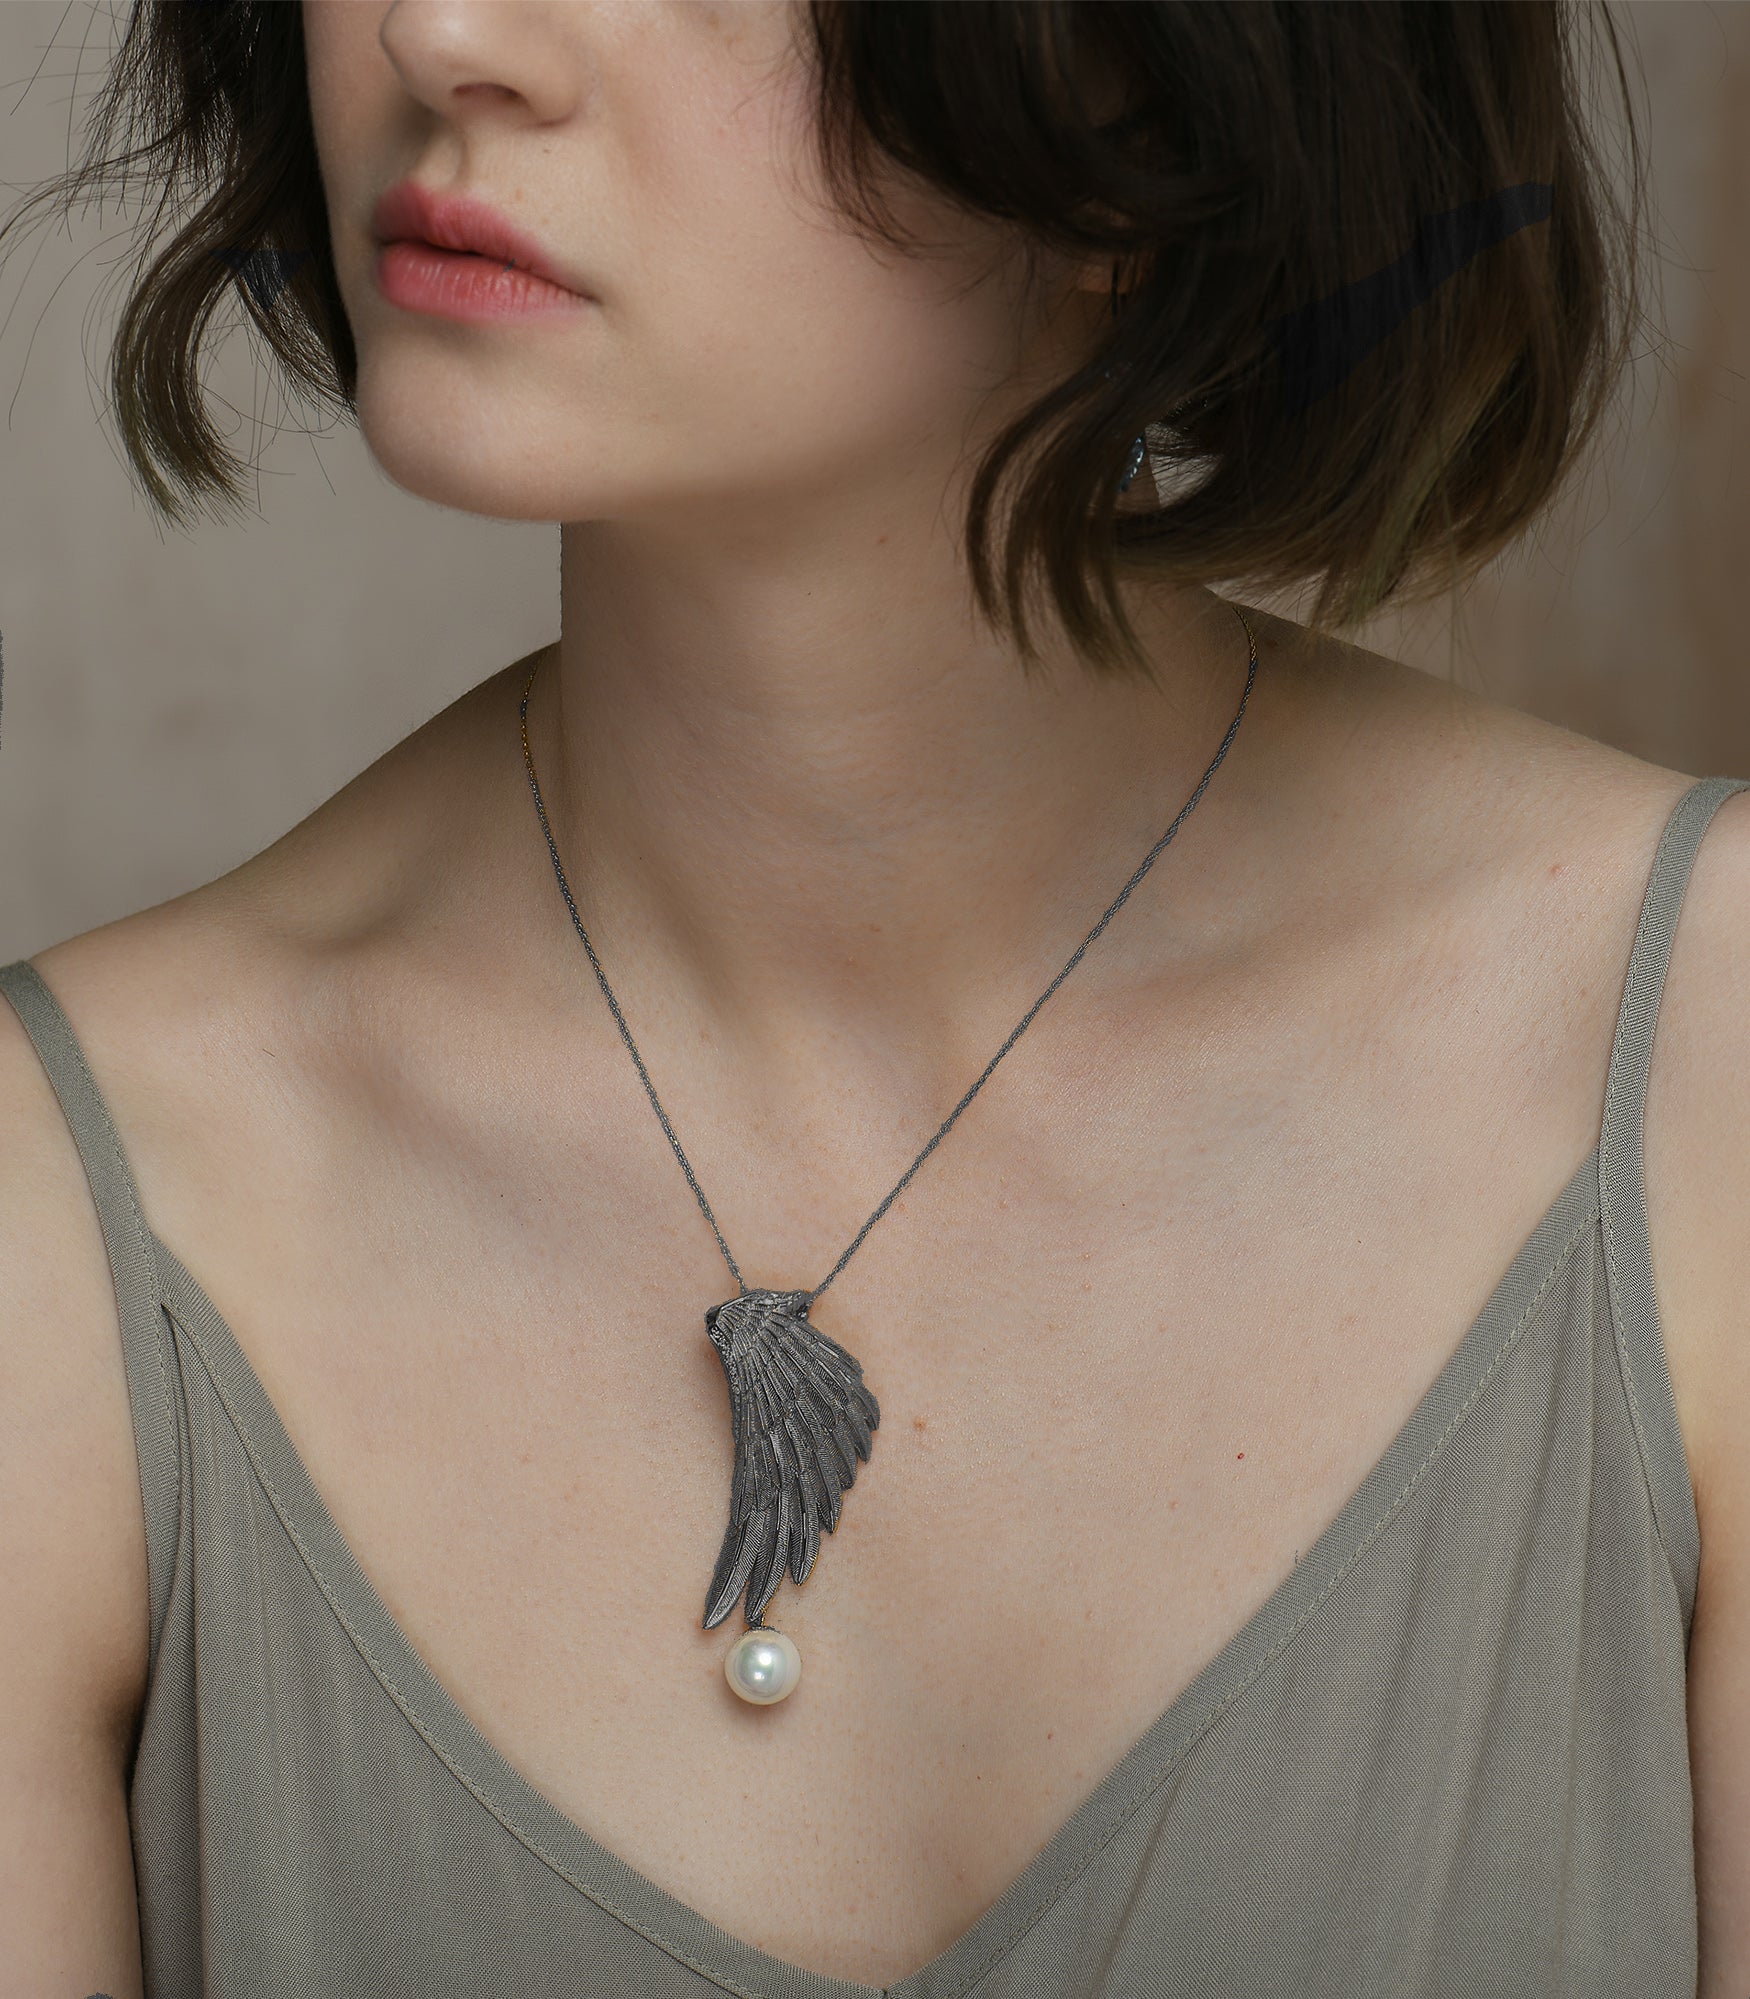 A lady wearing a sterling silver necklace with an eagle wing pendant which has a white pearl hanging from it.